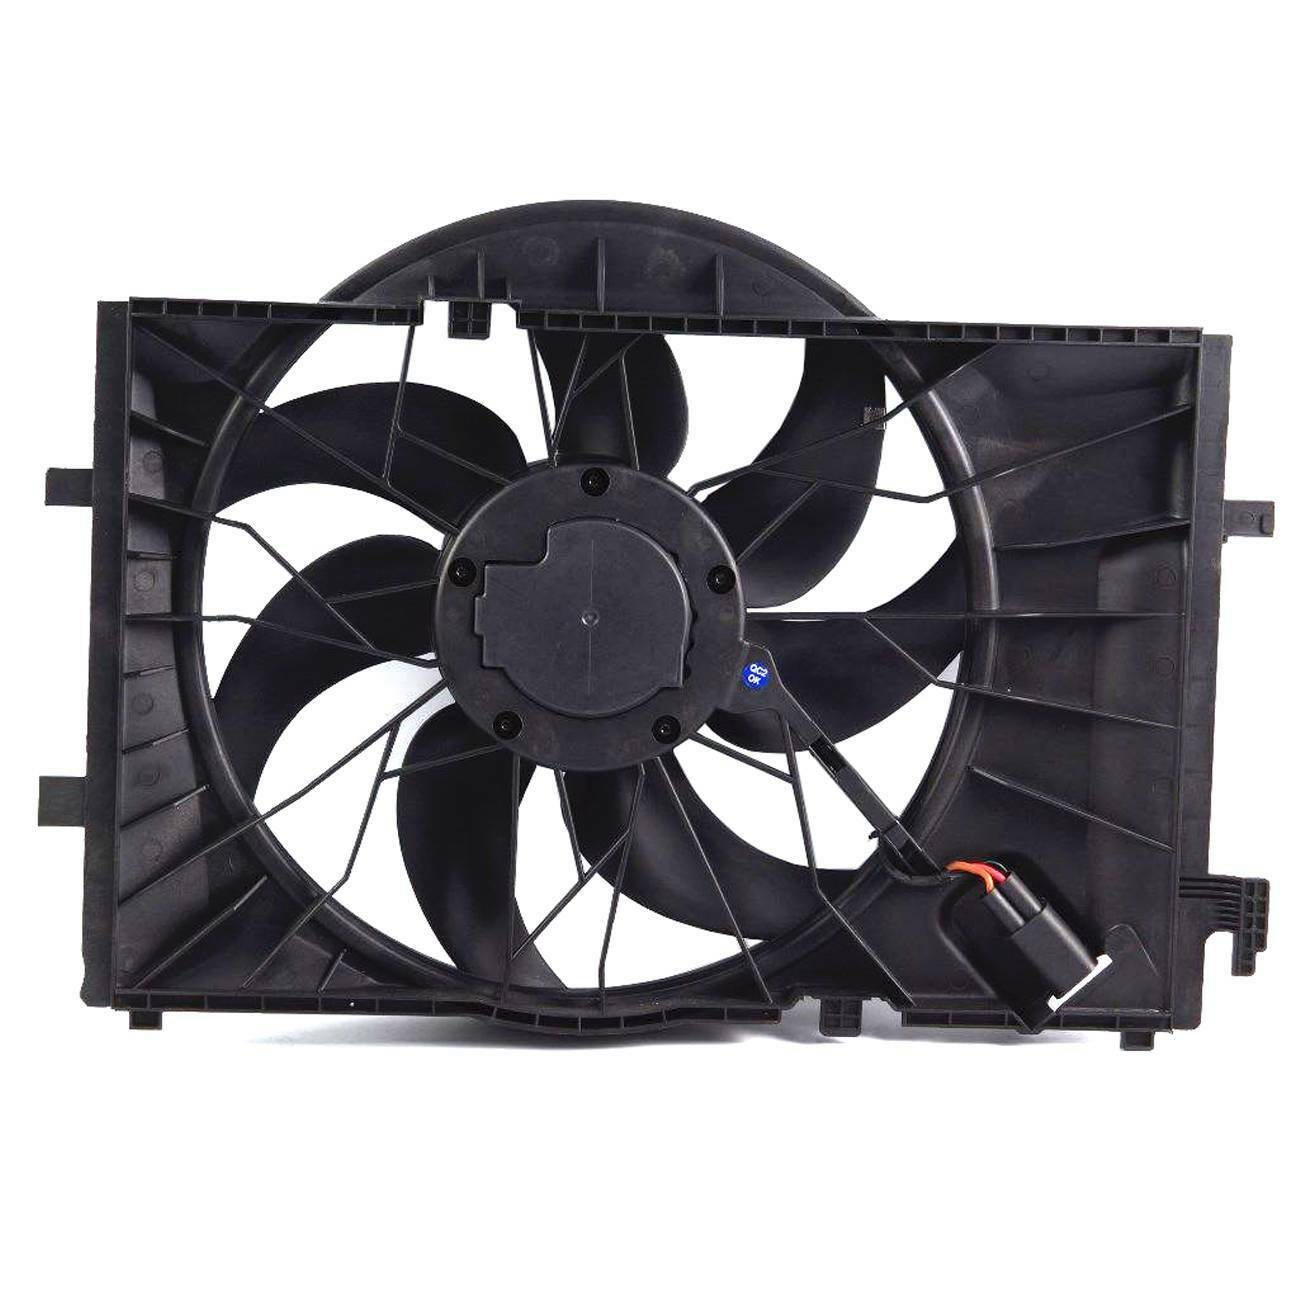 Electric Cooling Fan 600W for Mercedes W203 S203 CL203 C209 A209 R171 C180 German Made